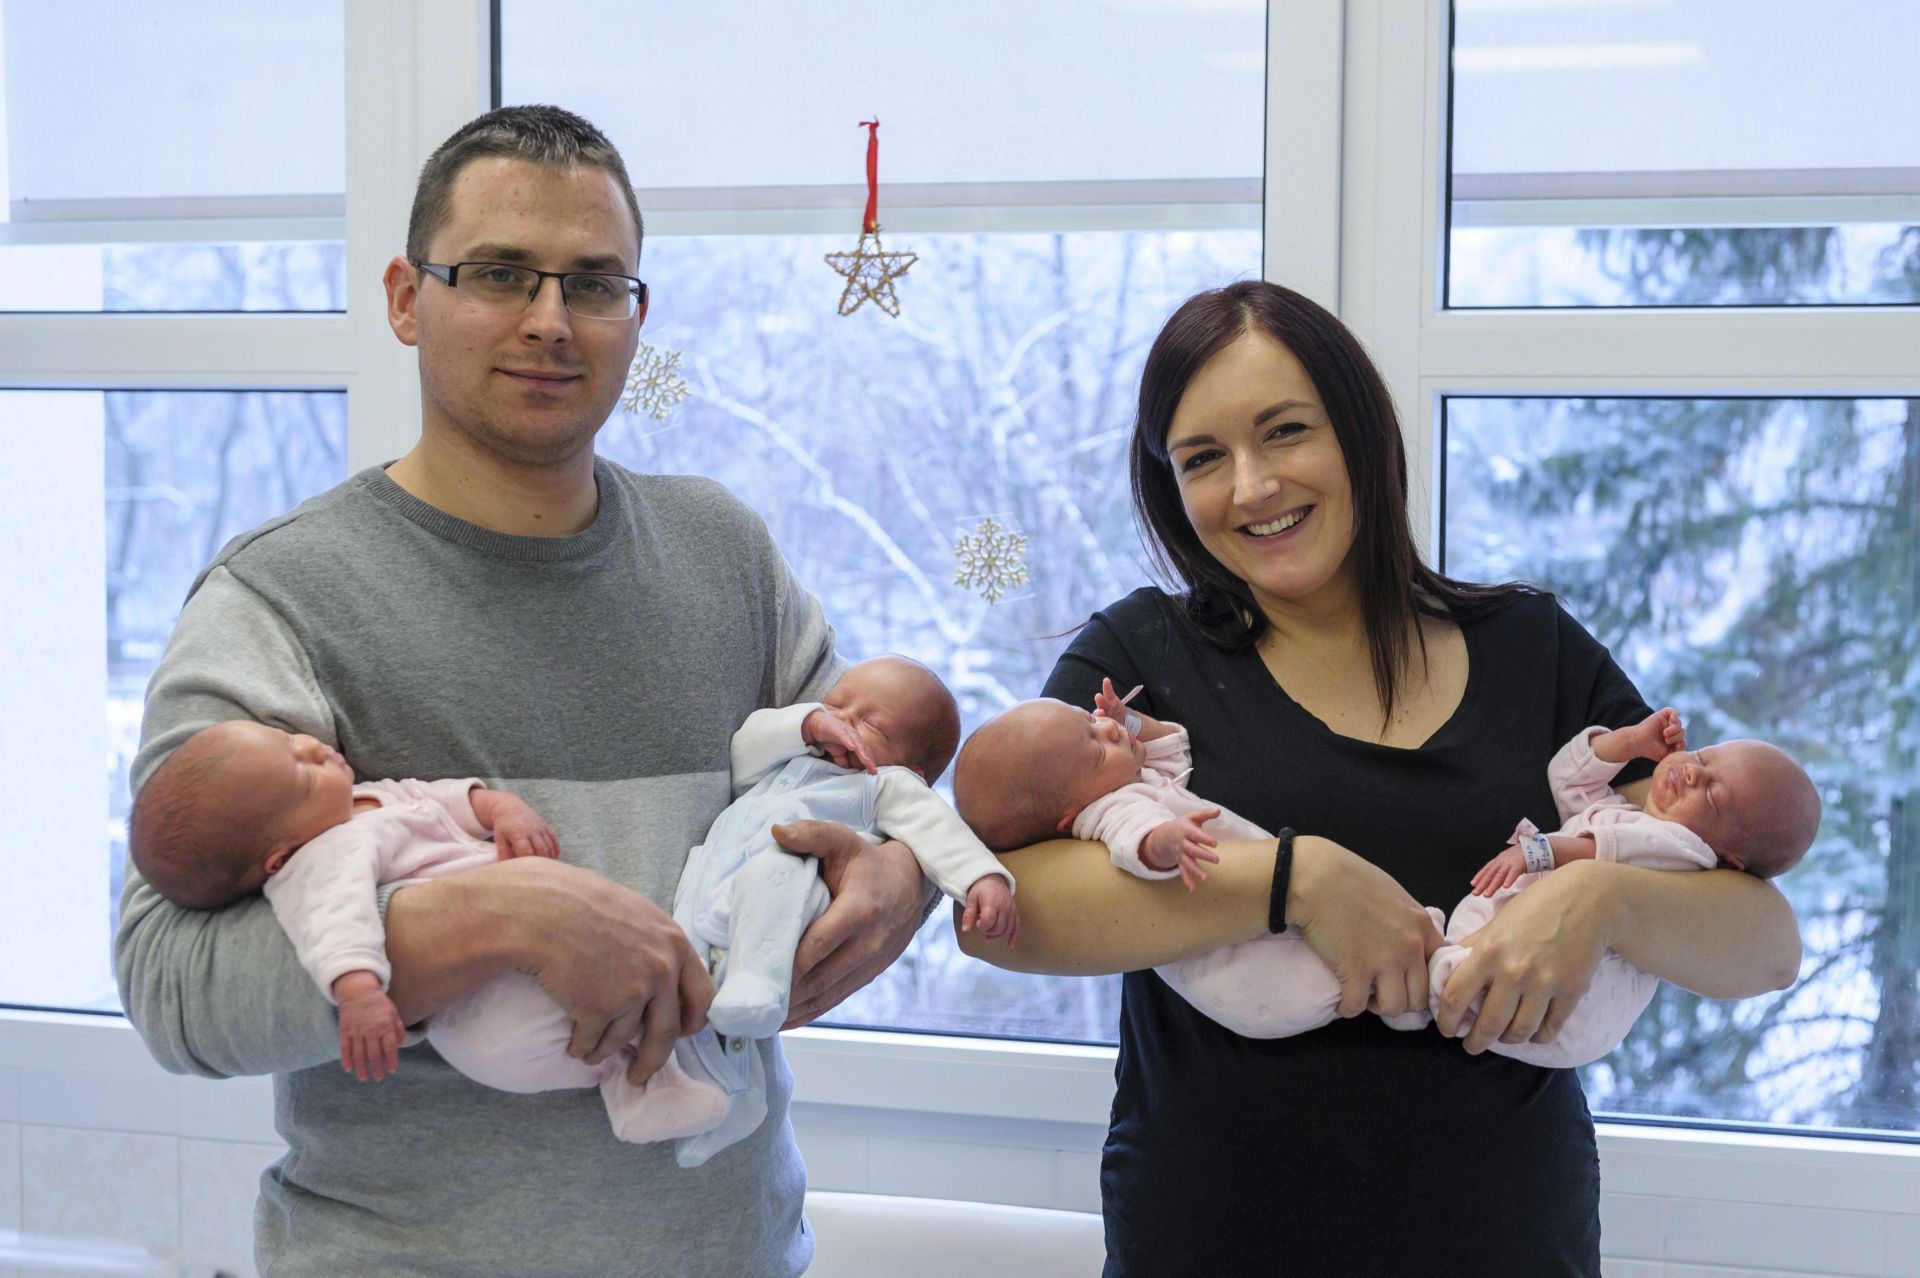 epa05682453 Beata Boda (R) and her husband Istvan Boda pose with their quadruplets in the Department of Obstetrics and Gynaecology of the University of Debrecen, 226 kms east of Budapest, Hungary, 19 December 2016. The three girls, Jazmin, Flora, Boglarka and the boy Istvan had been conceived in natural way and were born on 24 November. The father, Istvan was also born in this same hospital as a member of quadruplets thirty years ago.  EPA/Zsolt Czegledi HUNGARY OUT